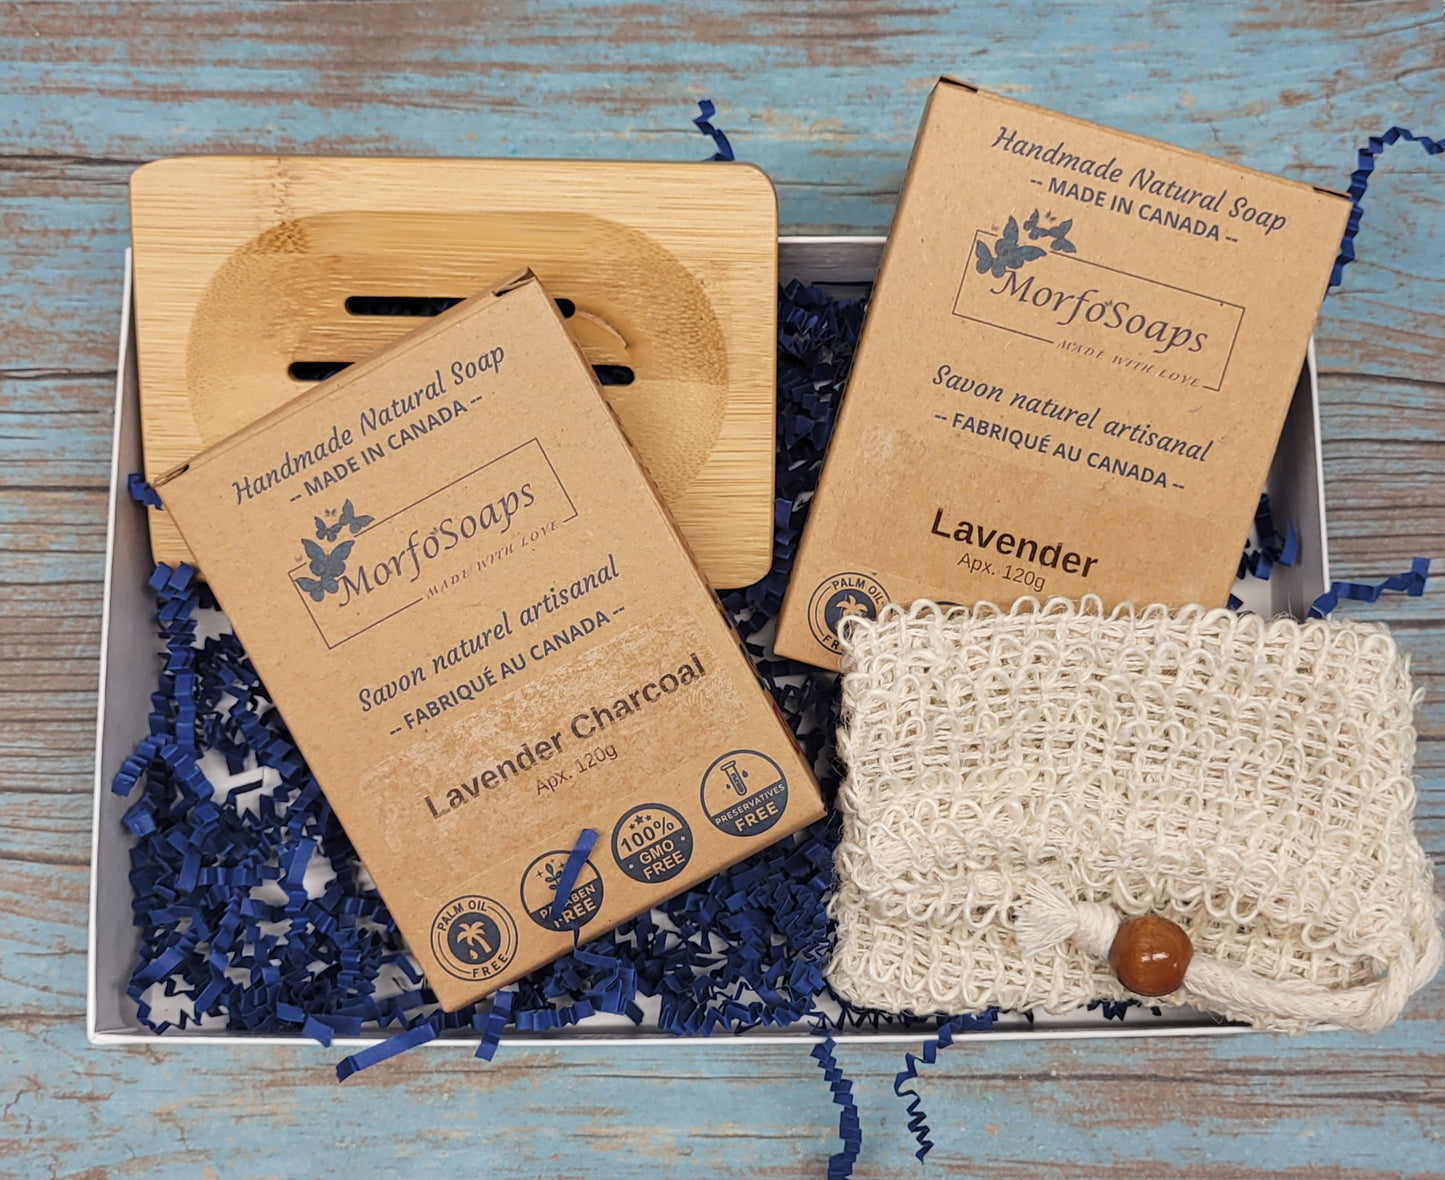 Soap Self-Care Gift Box by Morfosoaps